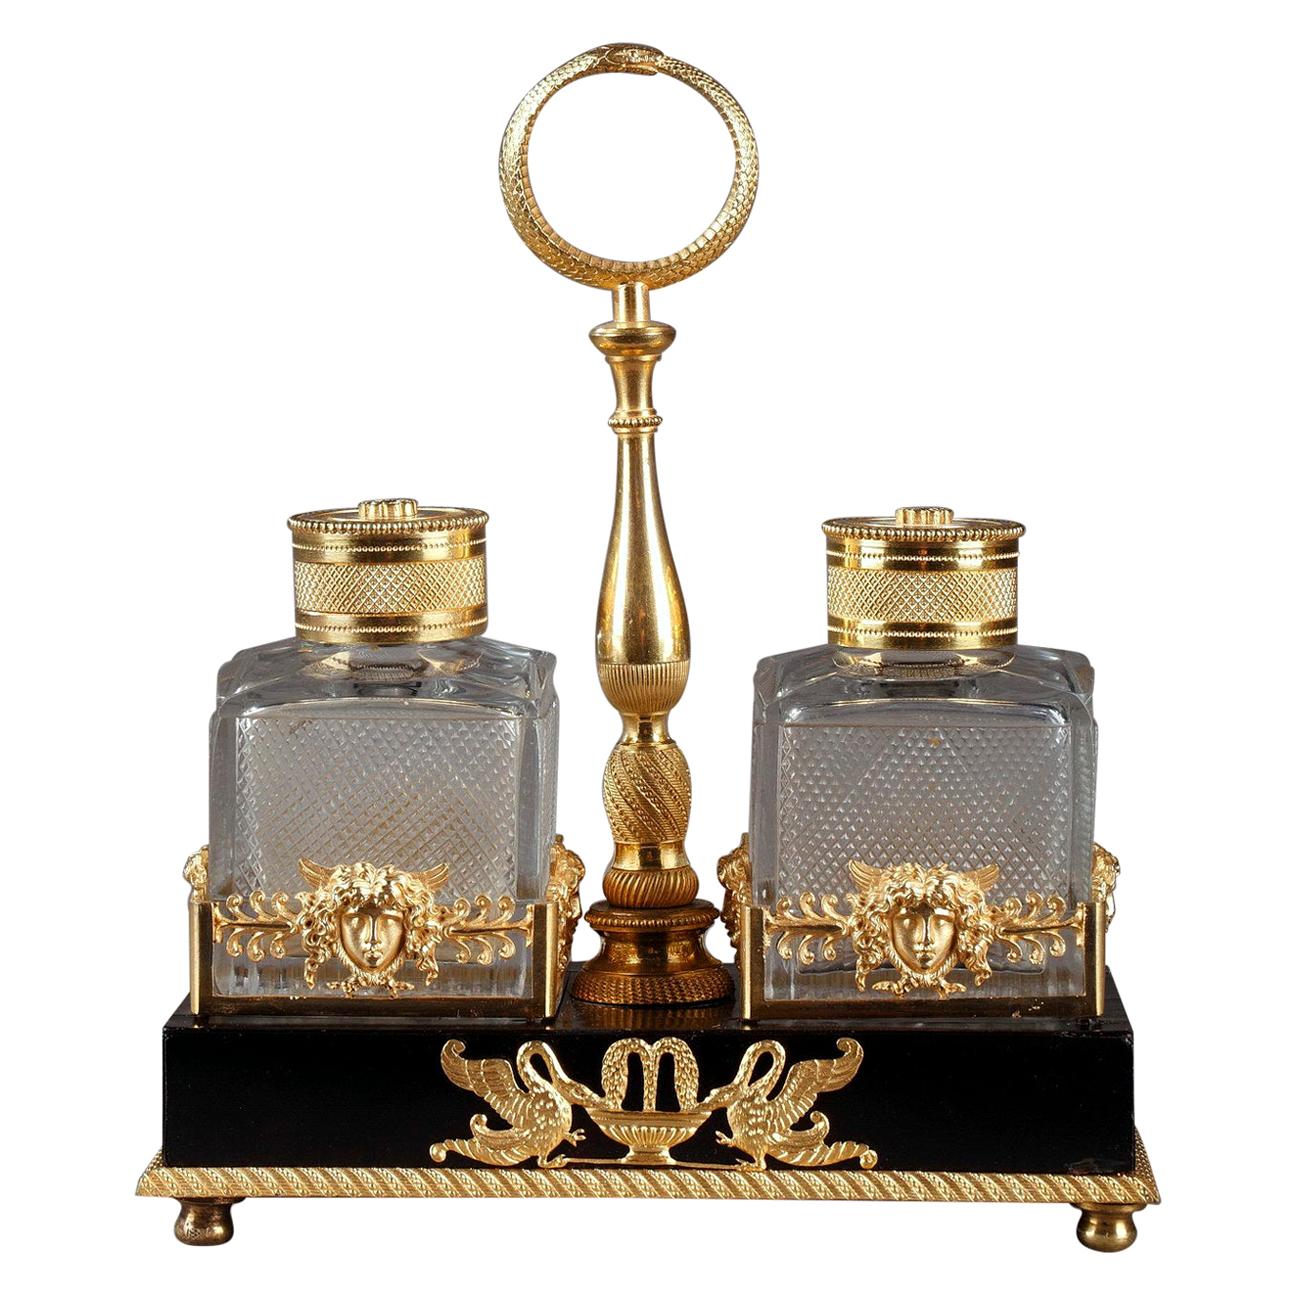 Early 19th Century Empire Inkstand